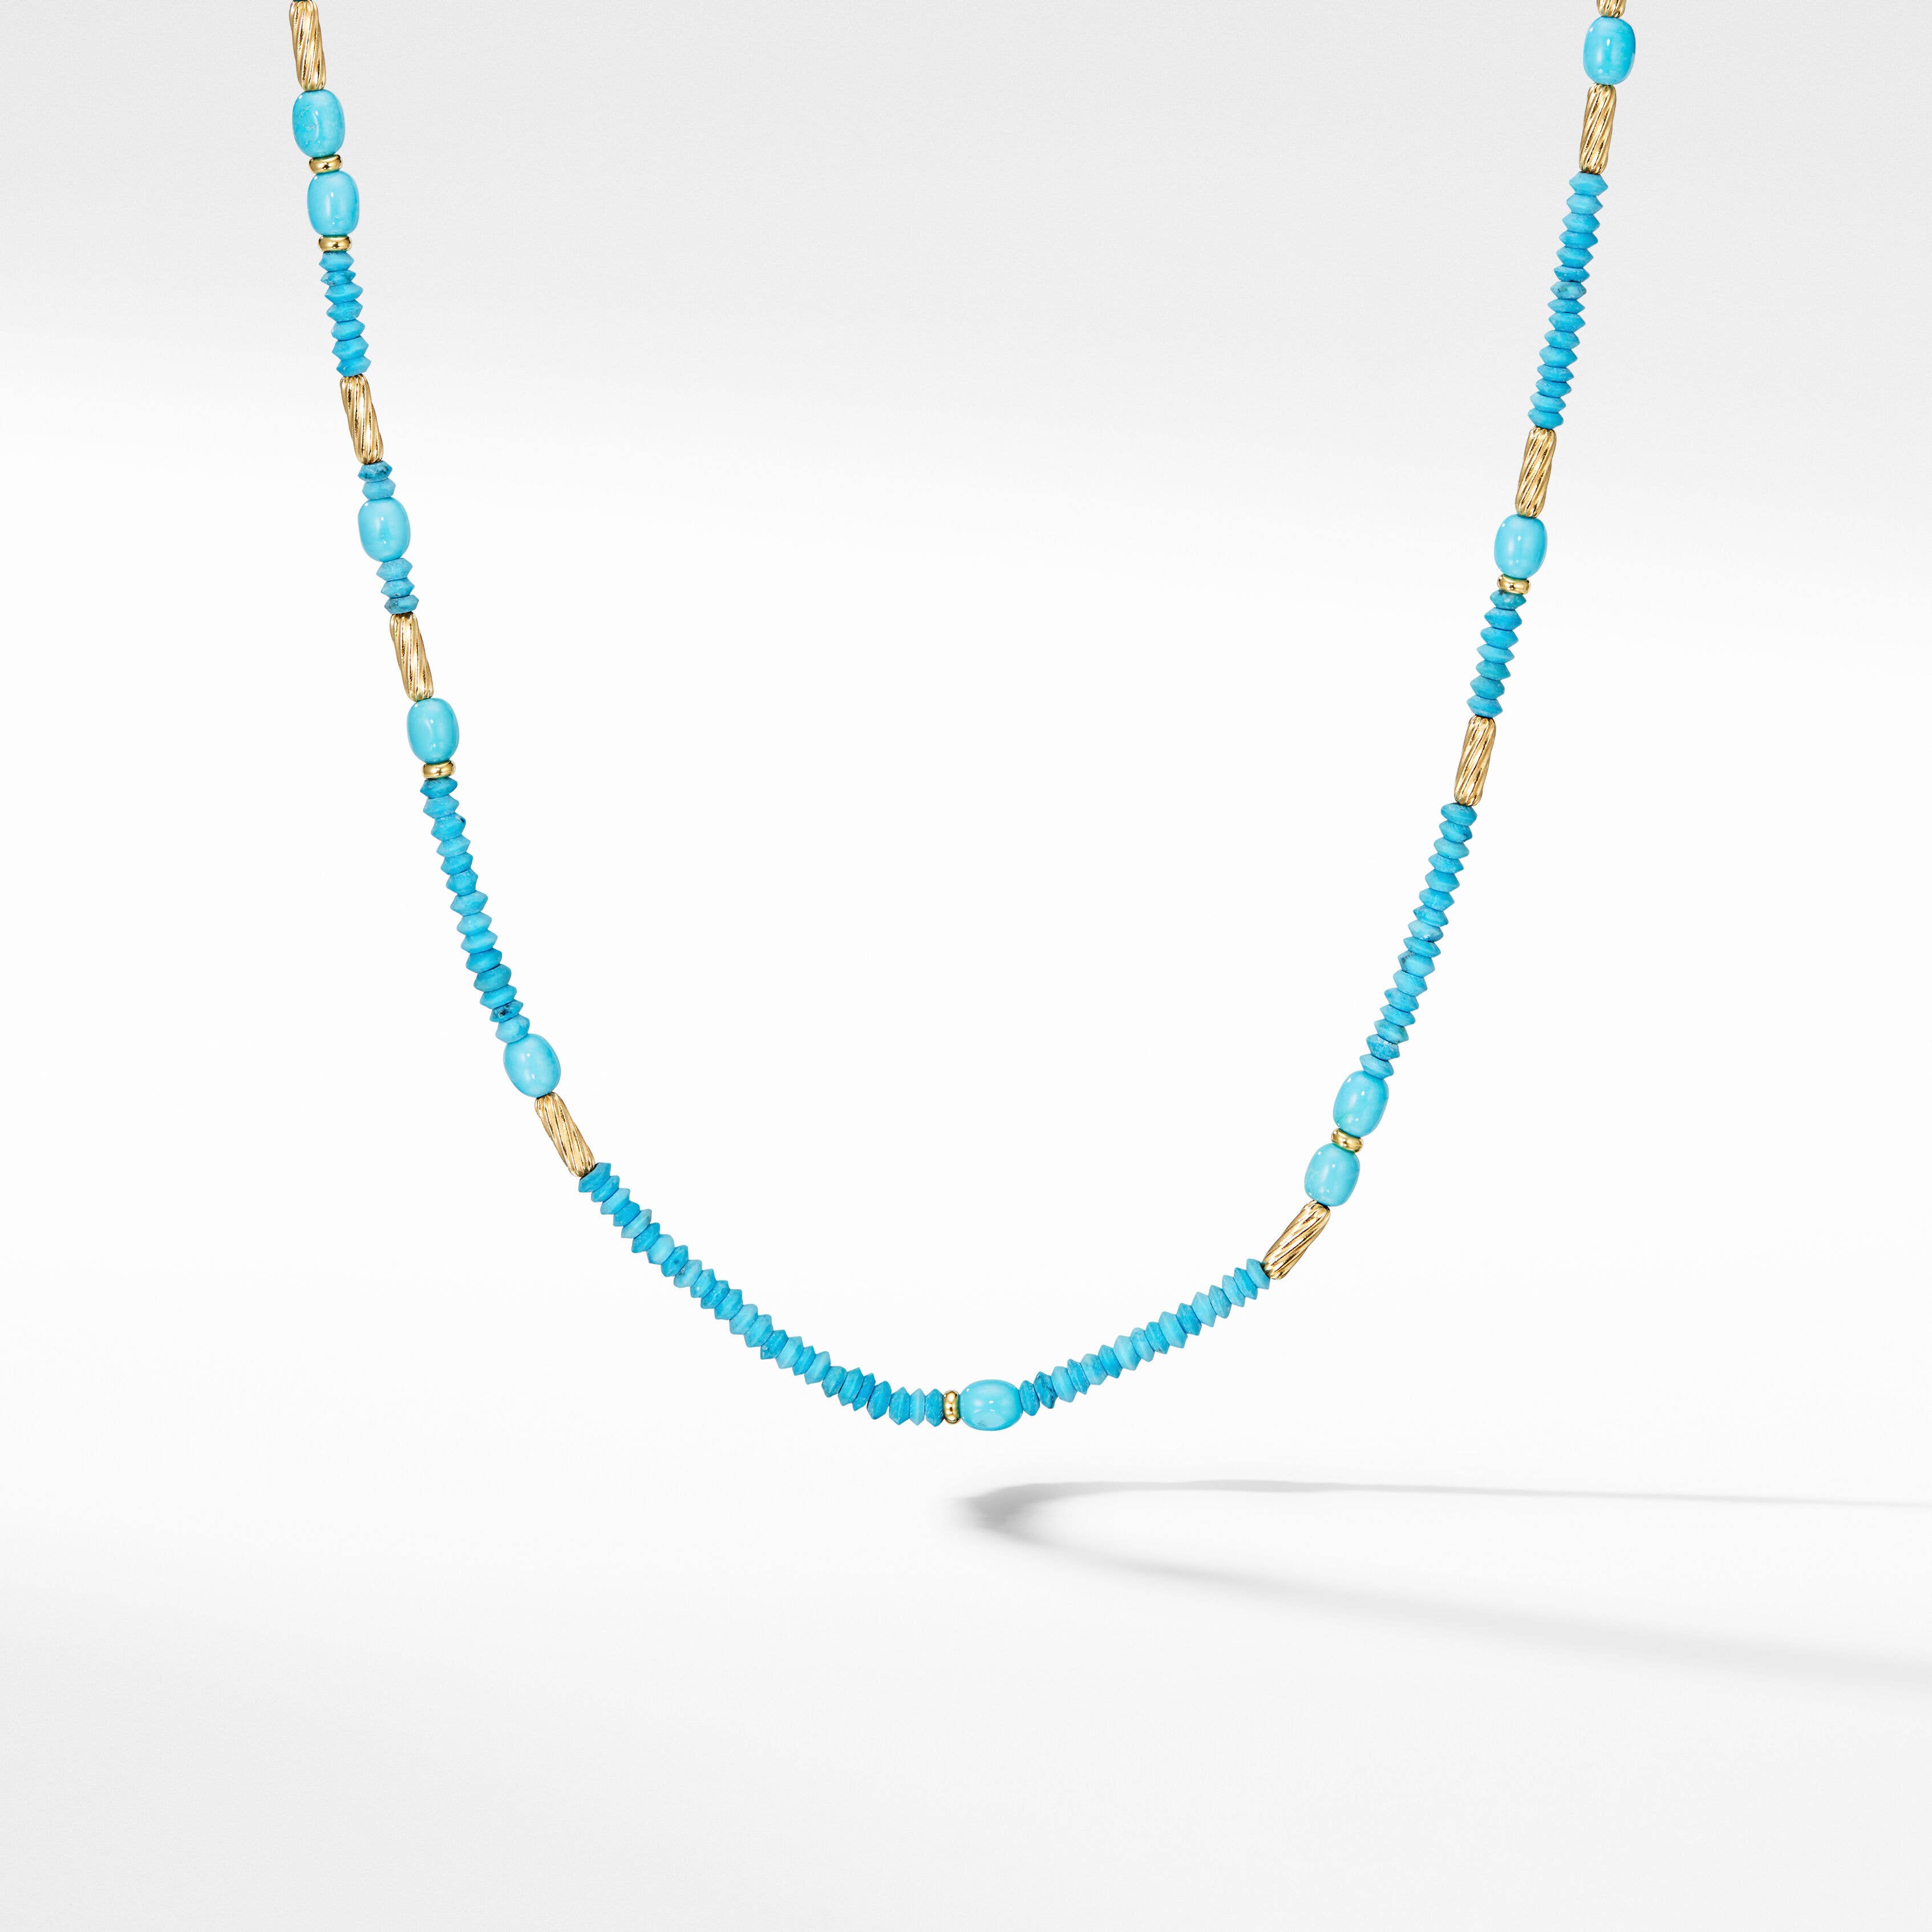 DY Signature Tweejoux Necklace with Serpentine, Turquoise and 18K Yellow Gold